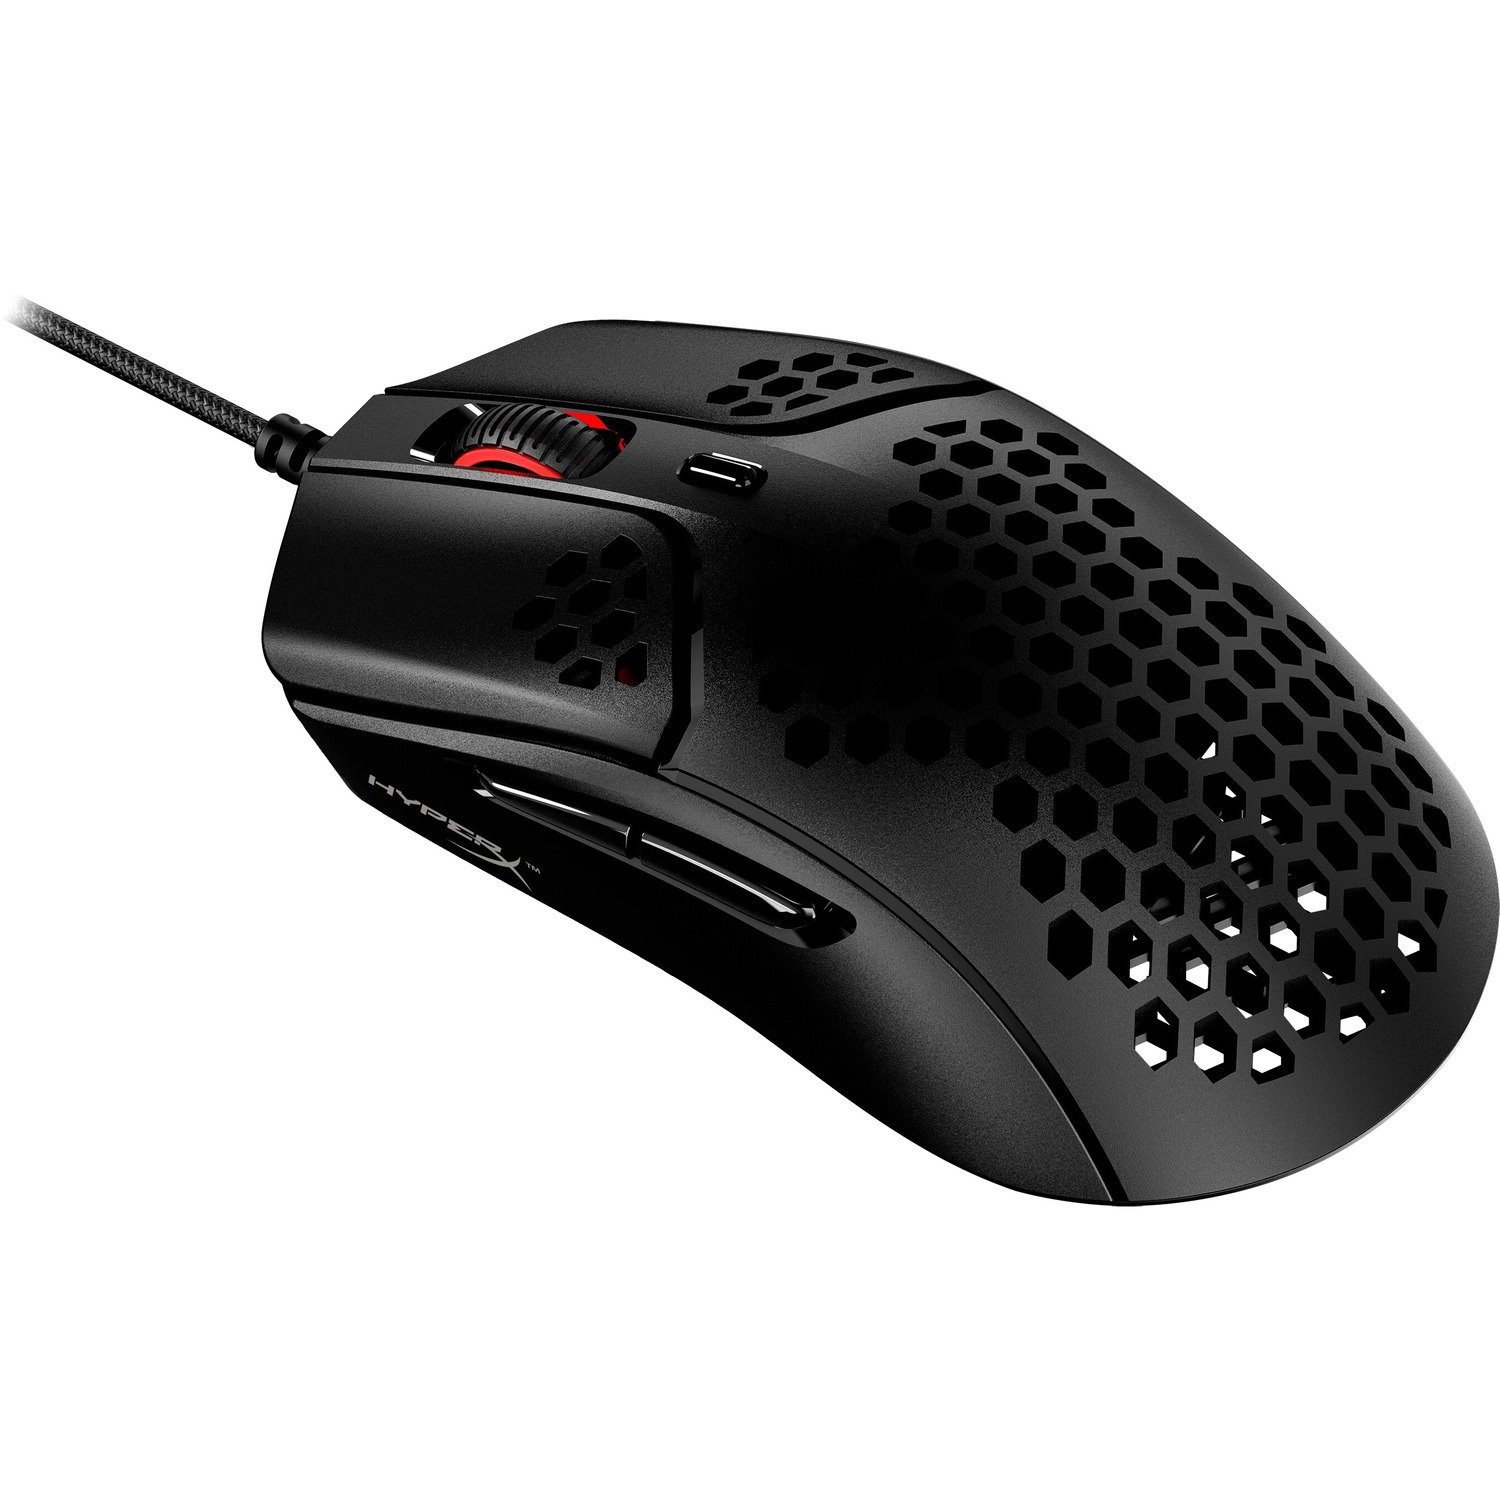 HyperX Pulsefire Haste Gaming Mouse - USB - 11 Button(s) - Black